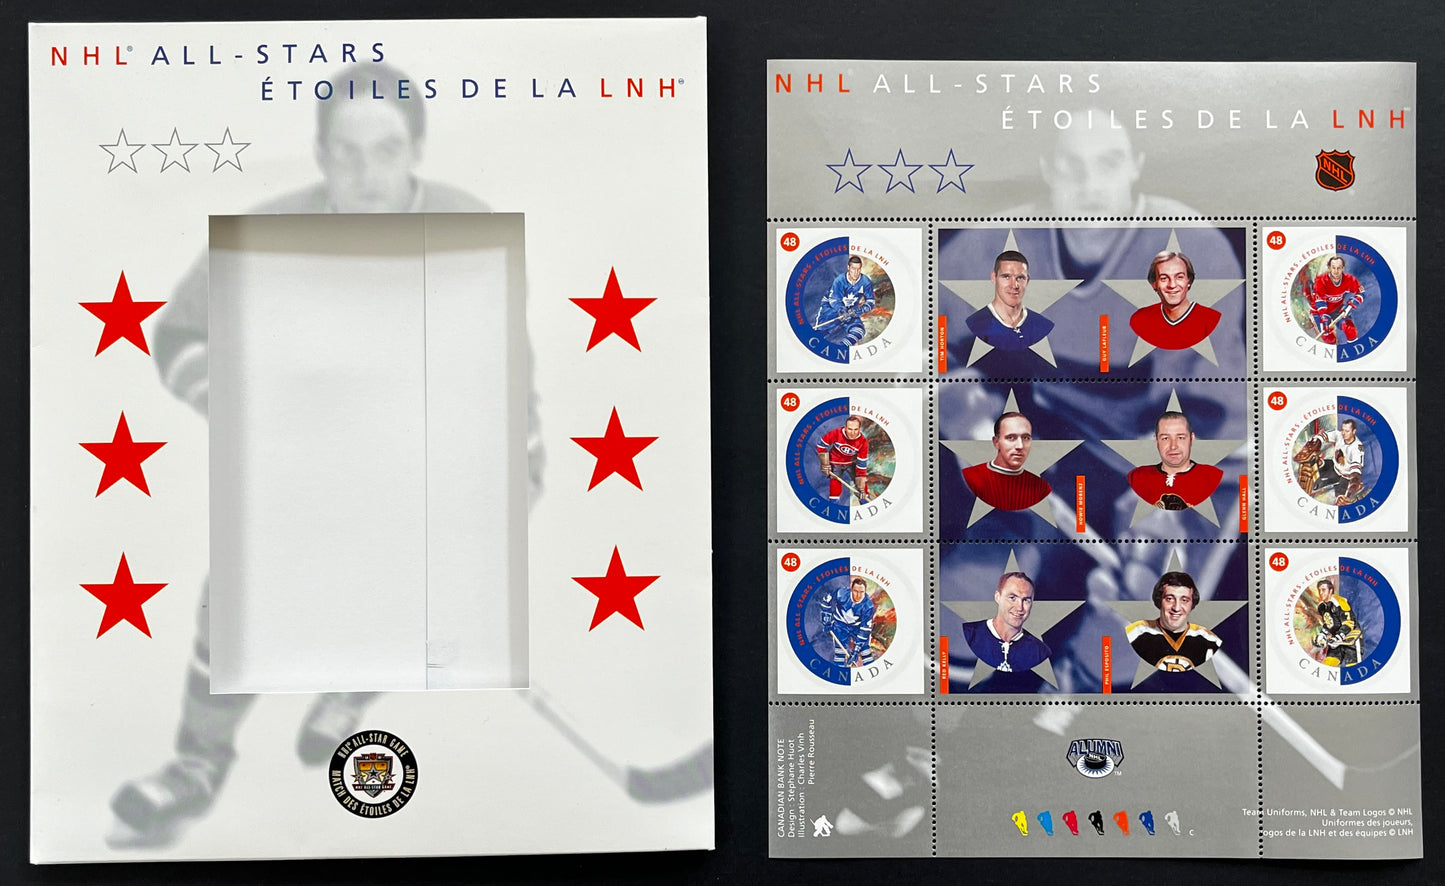 Canada Post - January 12, 2002 NHL All-Stars, Full pane of 6 stamps.